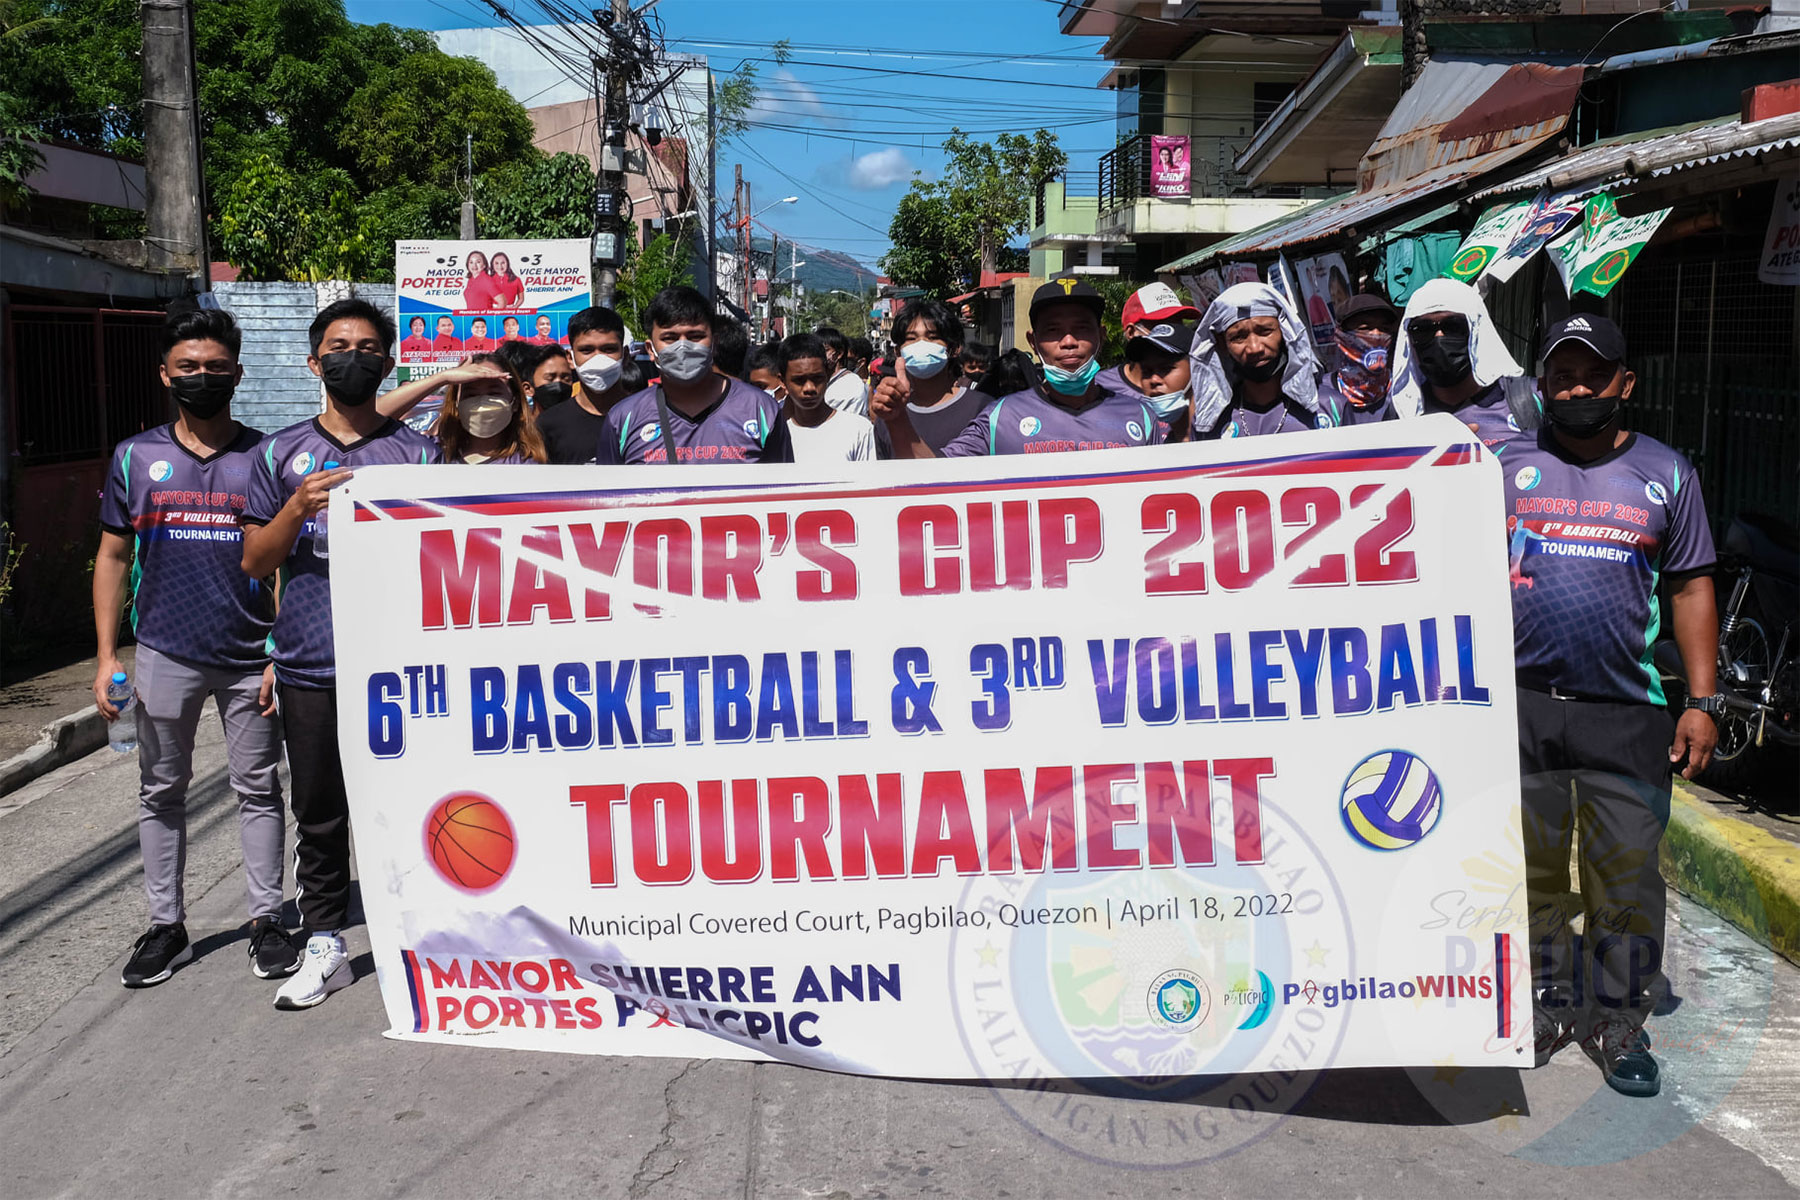  Mayor's Cup 2022 6th Basketball and 3rd Volleyball Tournament